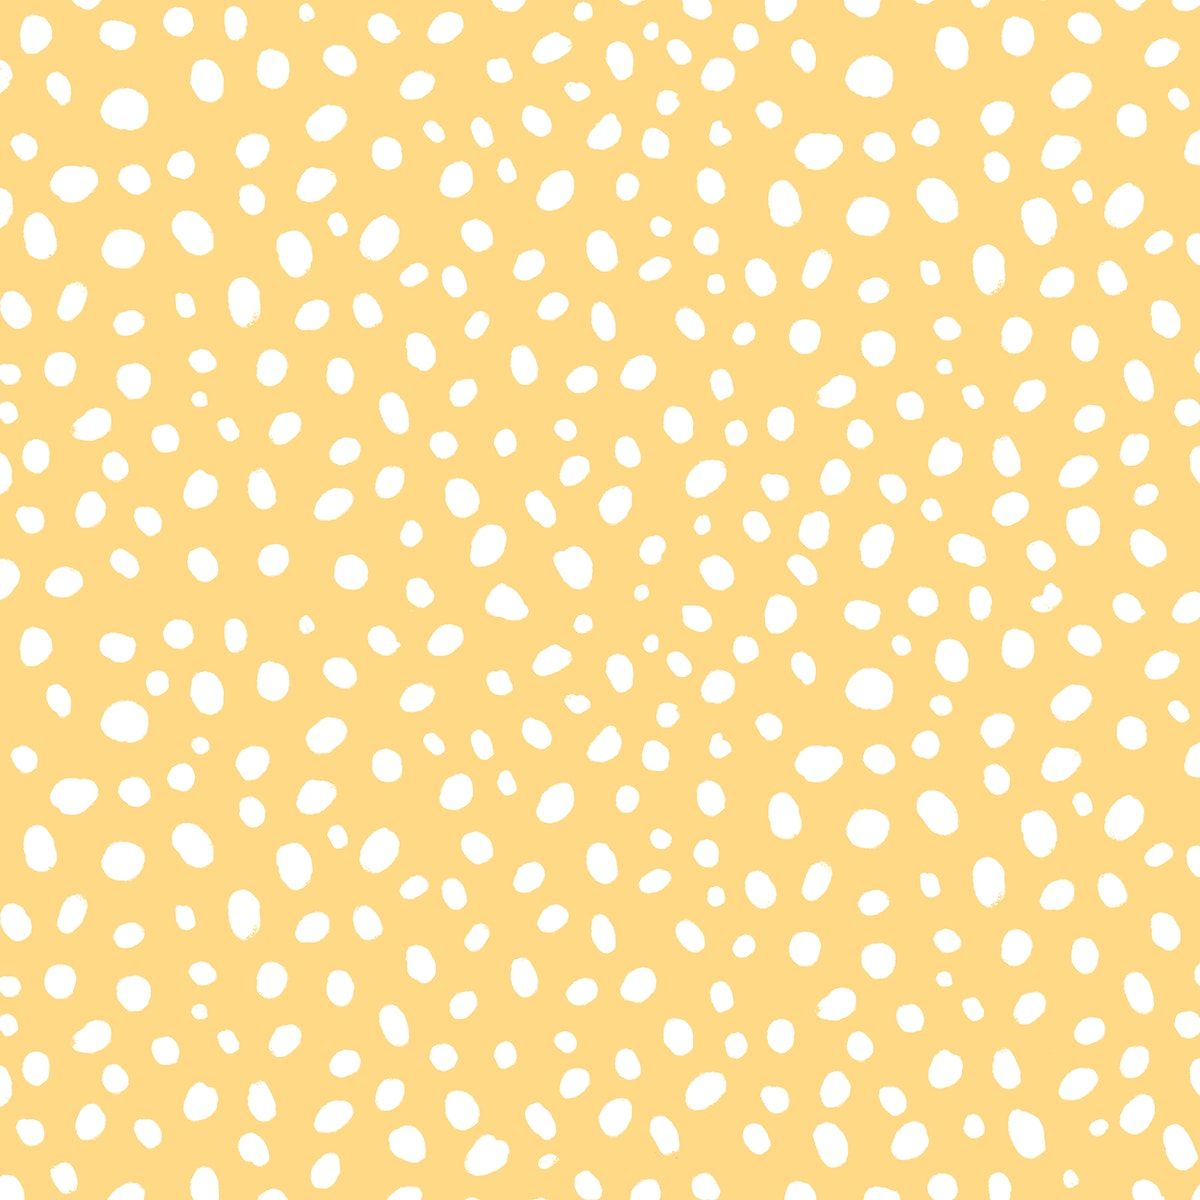 An abstract pattern of white dots on a yellow background - Yellow